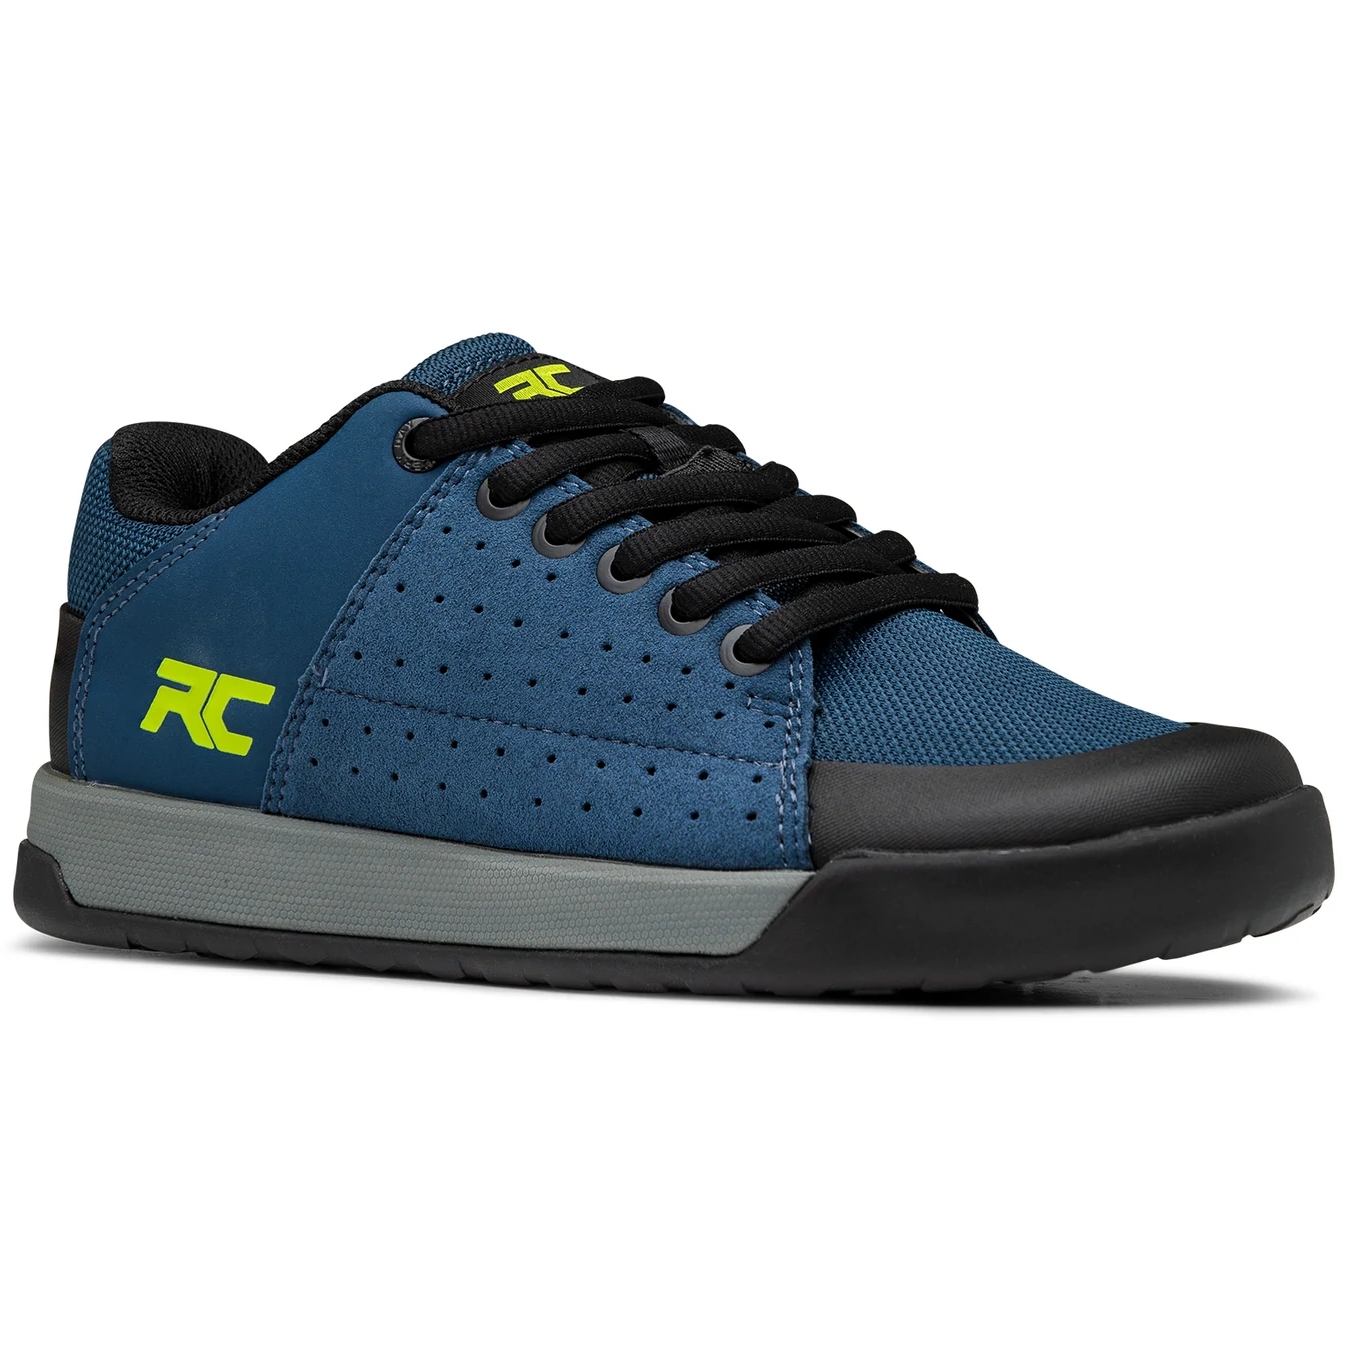 Productfoto van Ride Concepts Livewire Youth Shoe - Blue Smoke/Lime